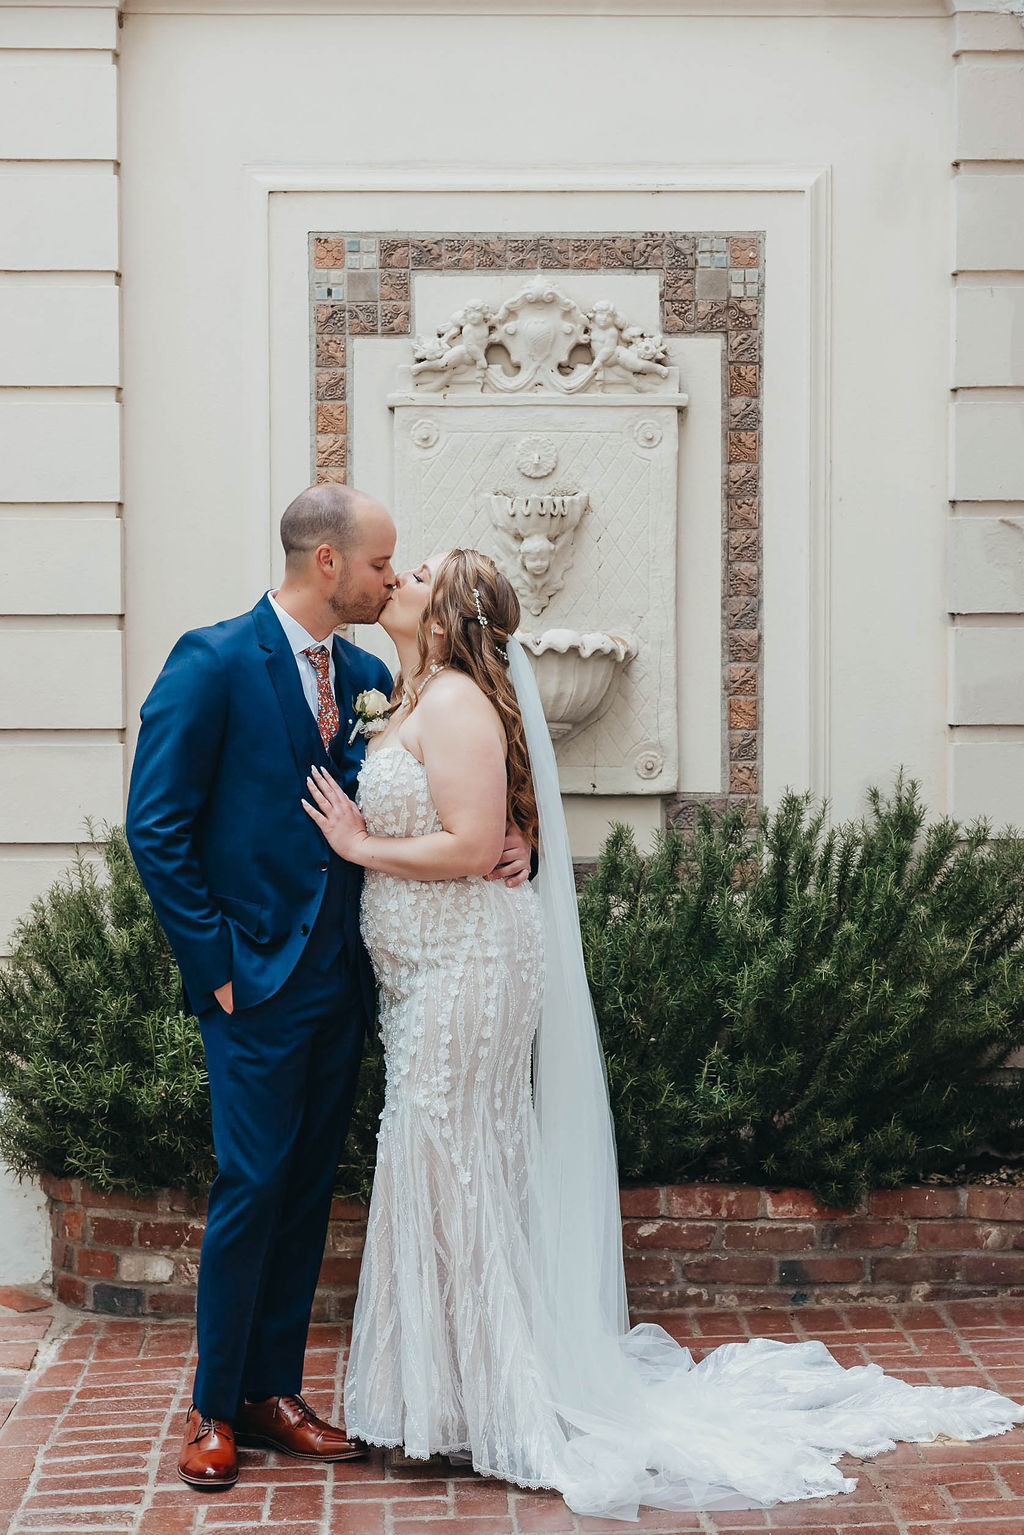 Bride and groom portraits from a luxurious Grand Island Mansion wedding in Northern California